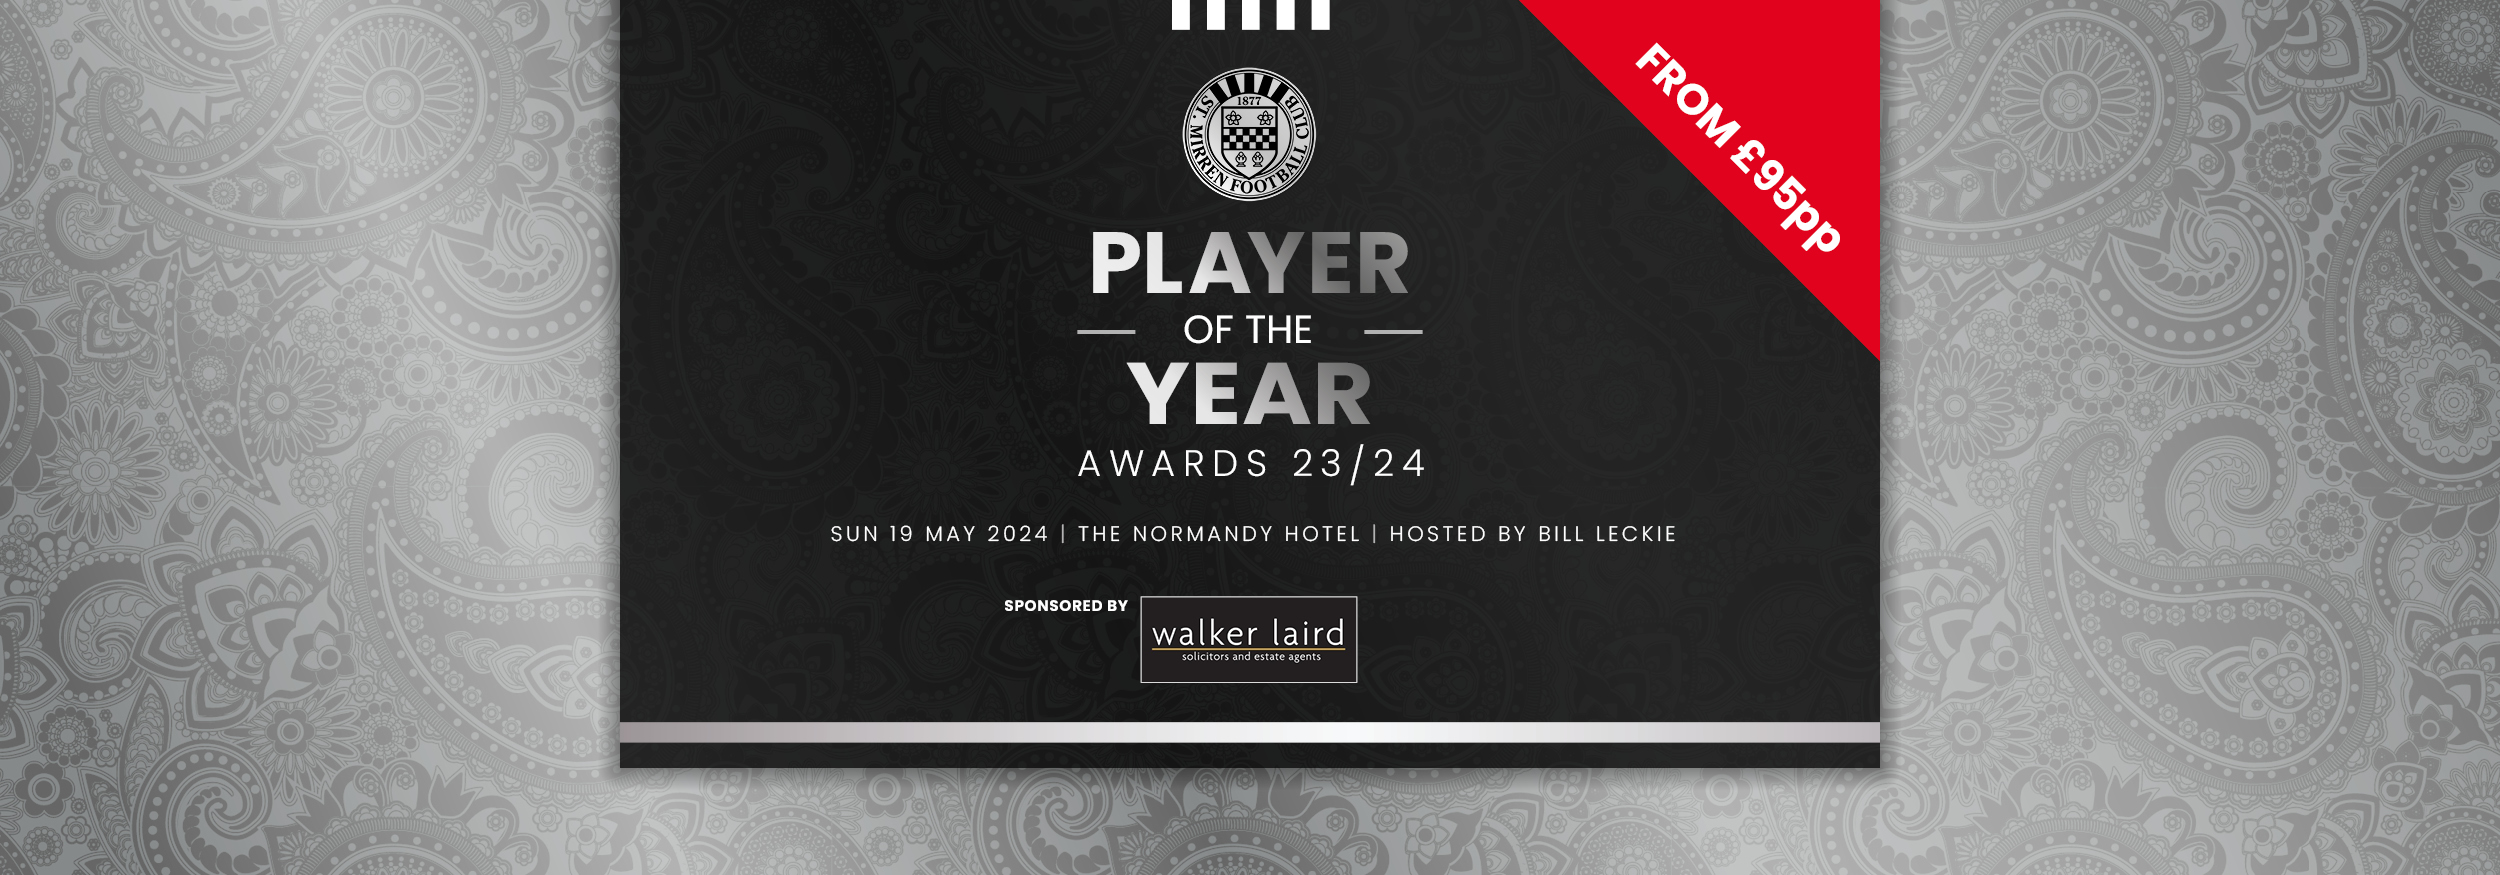 VOTE NOW | 2023/24 Player of the Year voting open